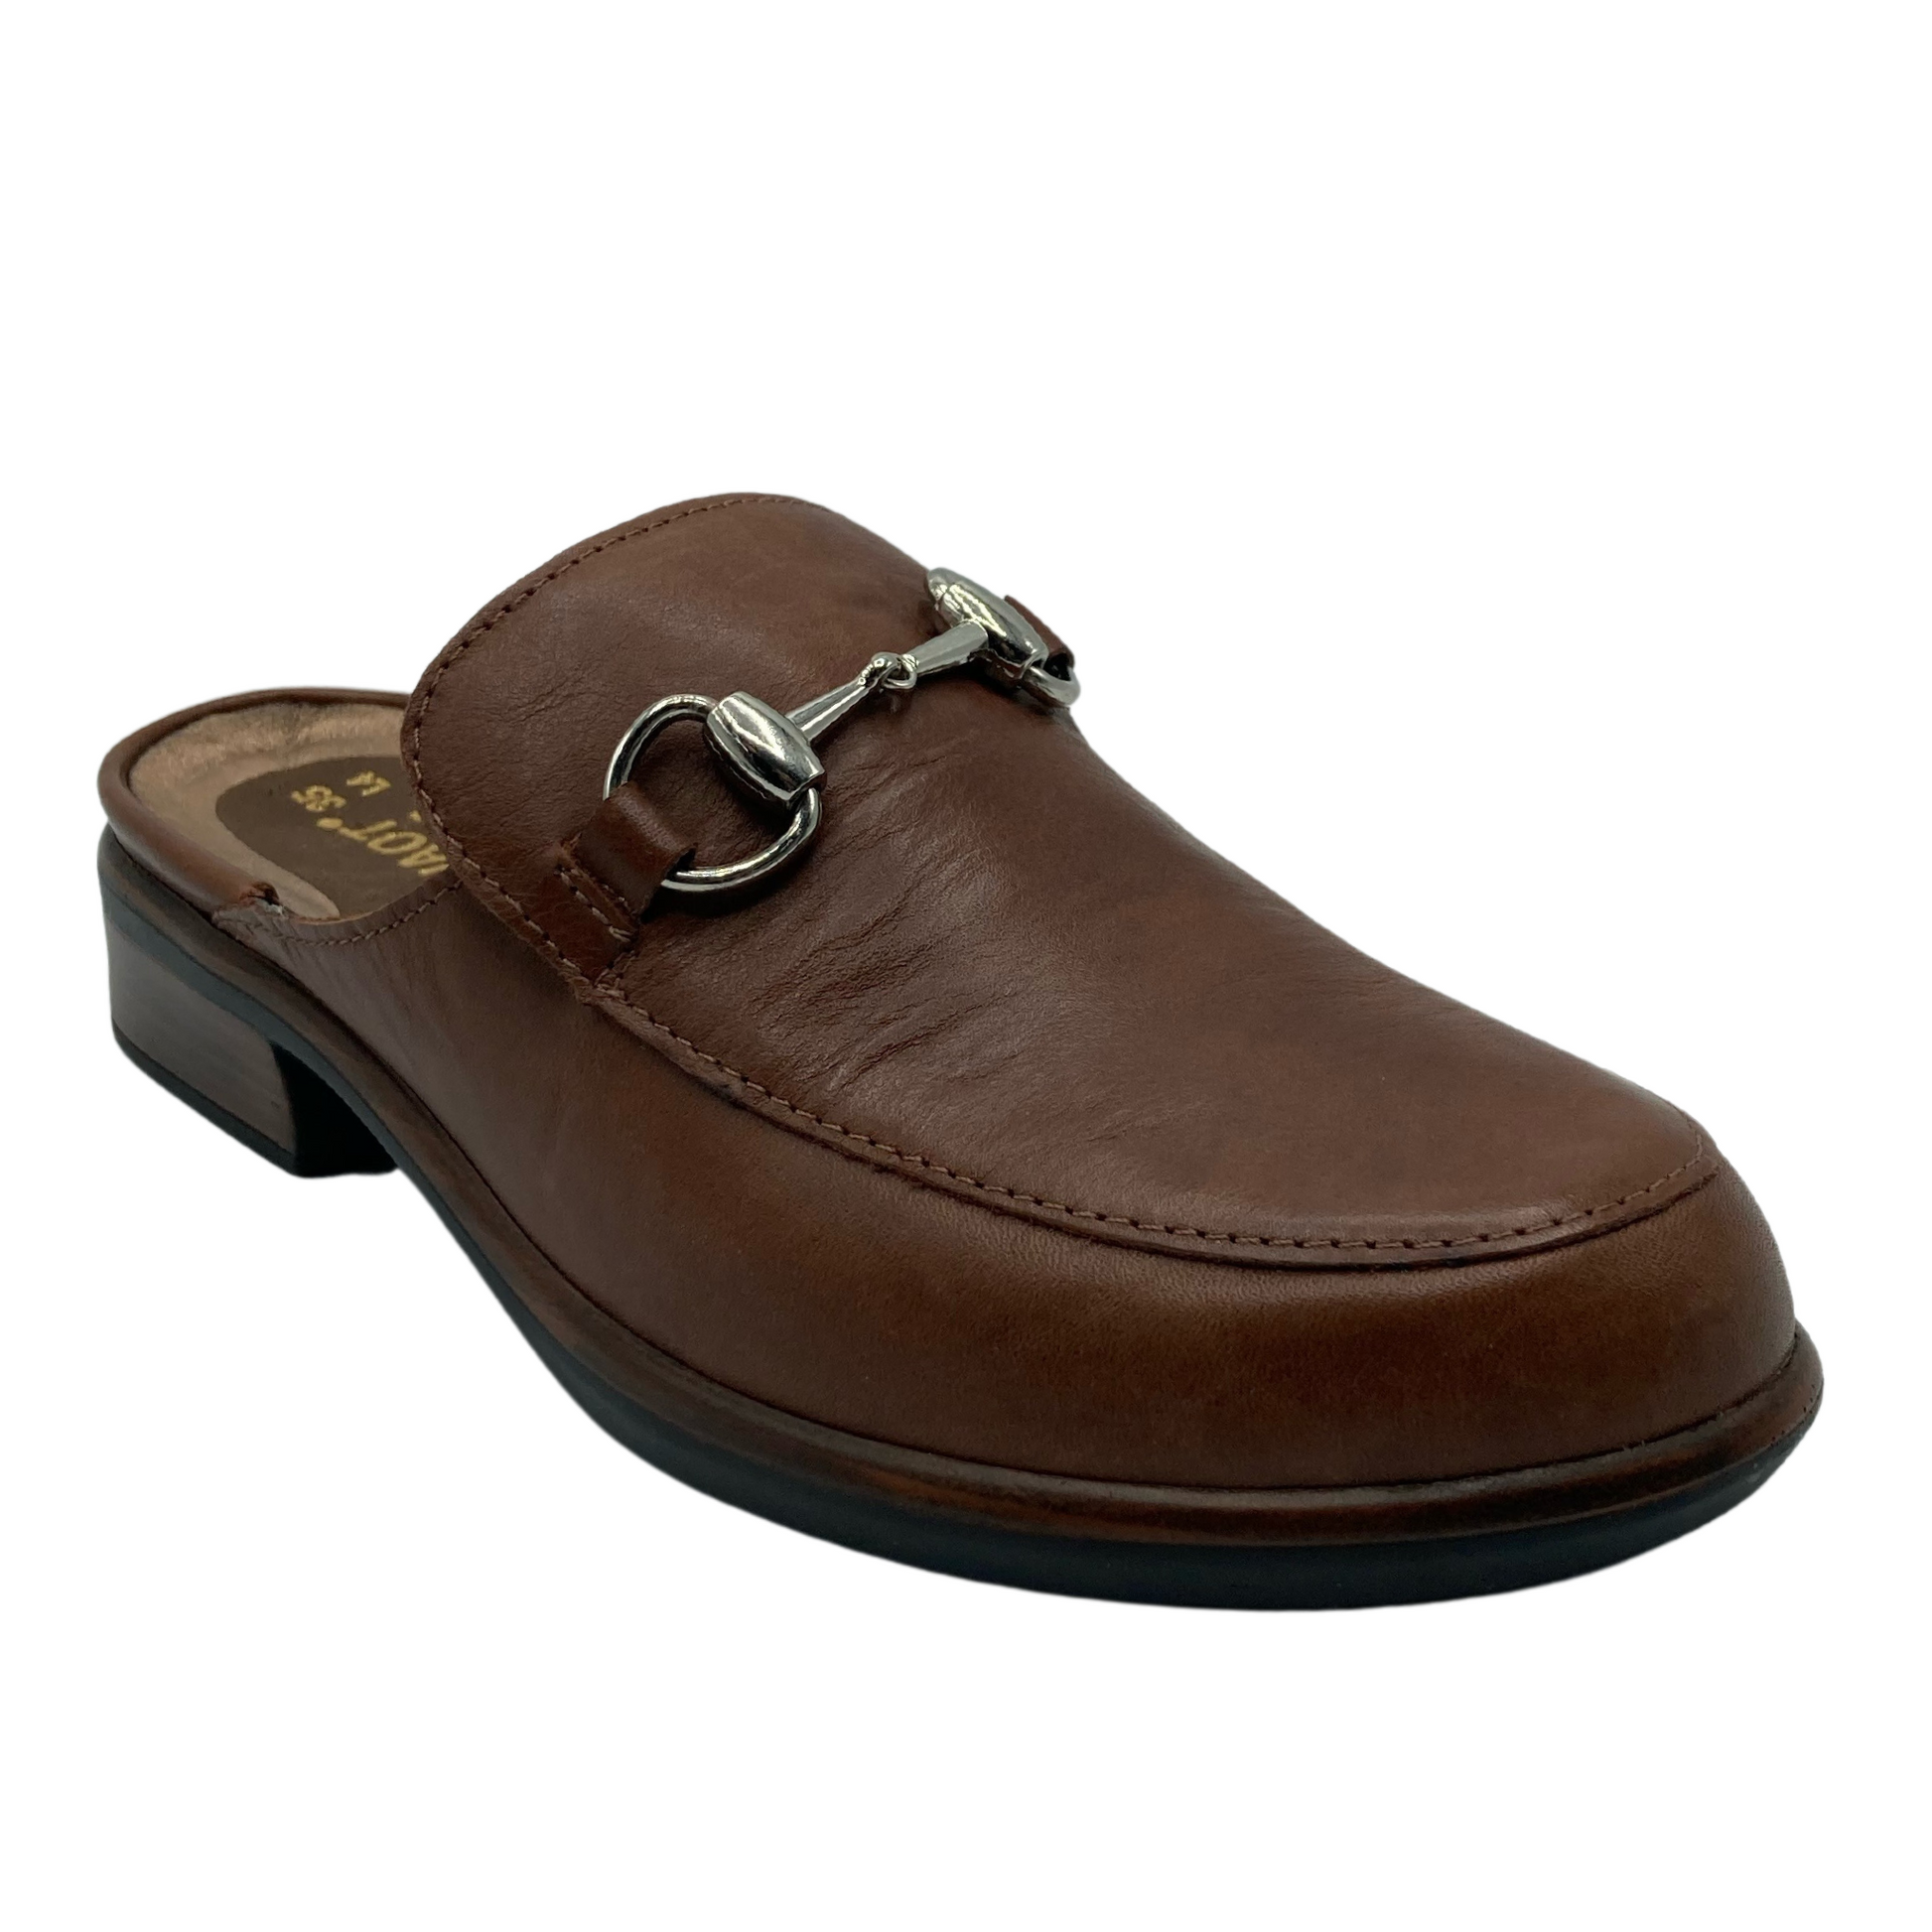 45 degree angled view of brown leather loafer slide with 1.5 inch heel with silver bit detail on upper